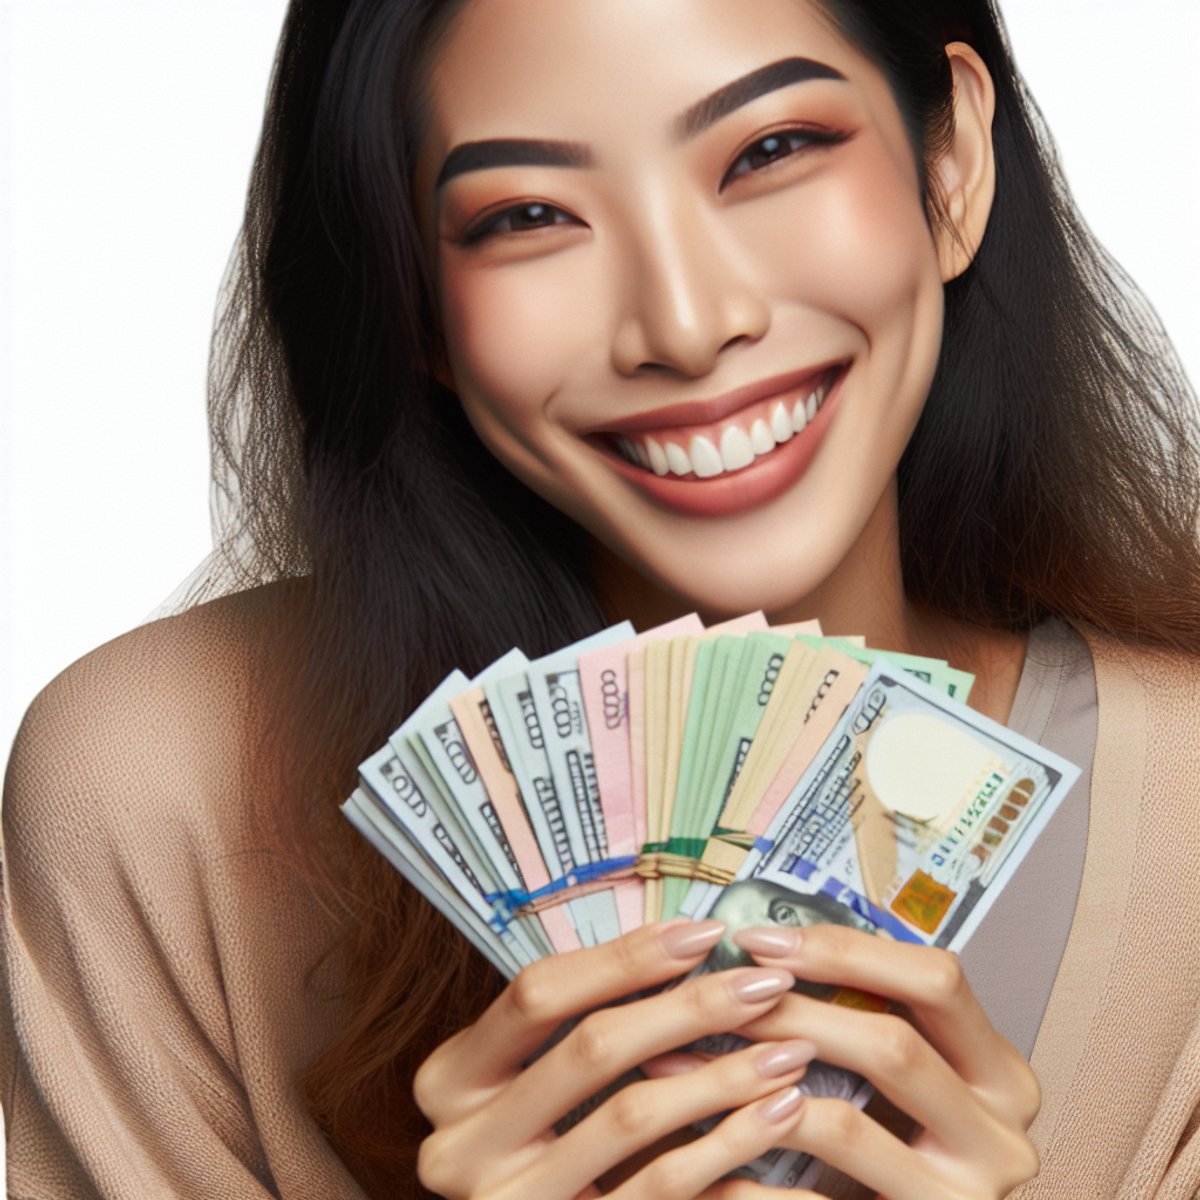 A close-up of a smiling Asian woman holding a stack of colorful banknotes in her hands.